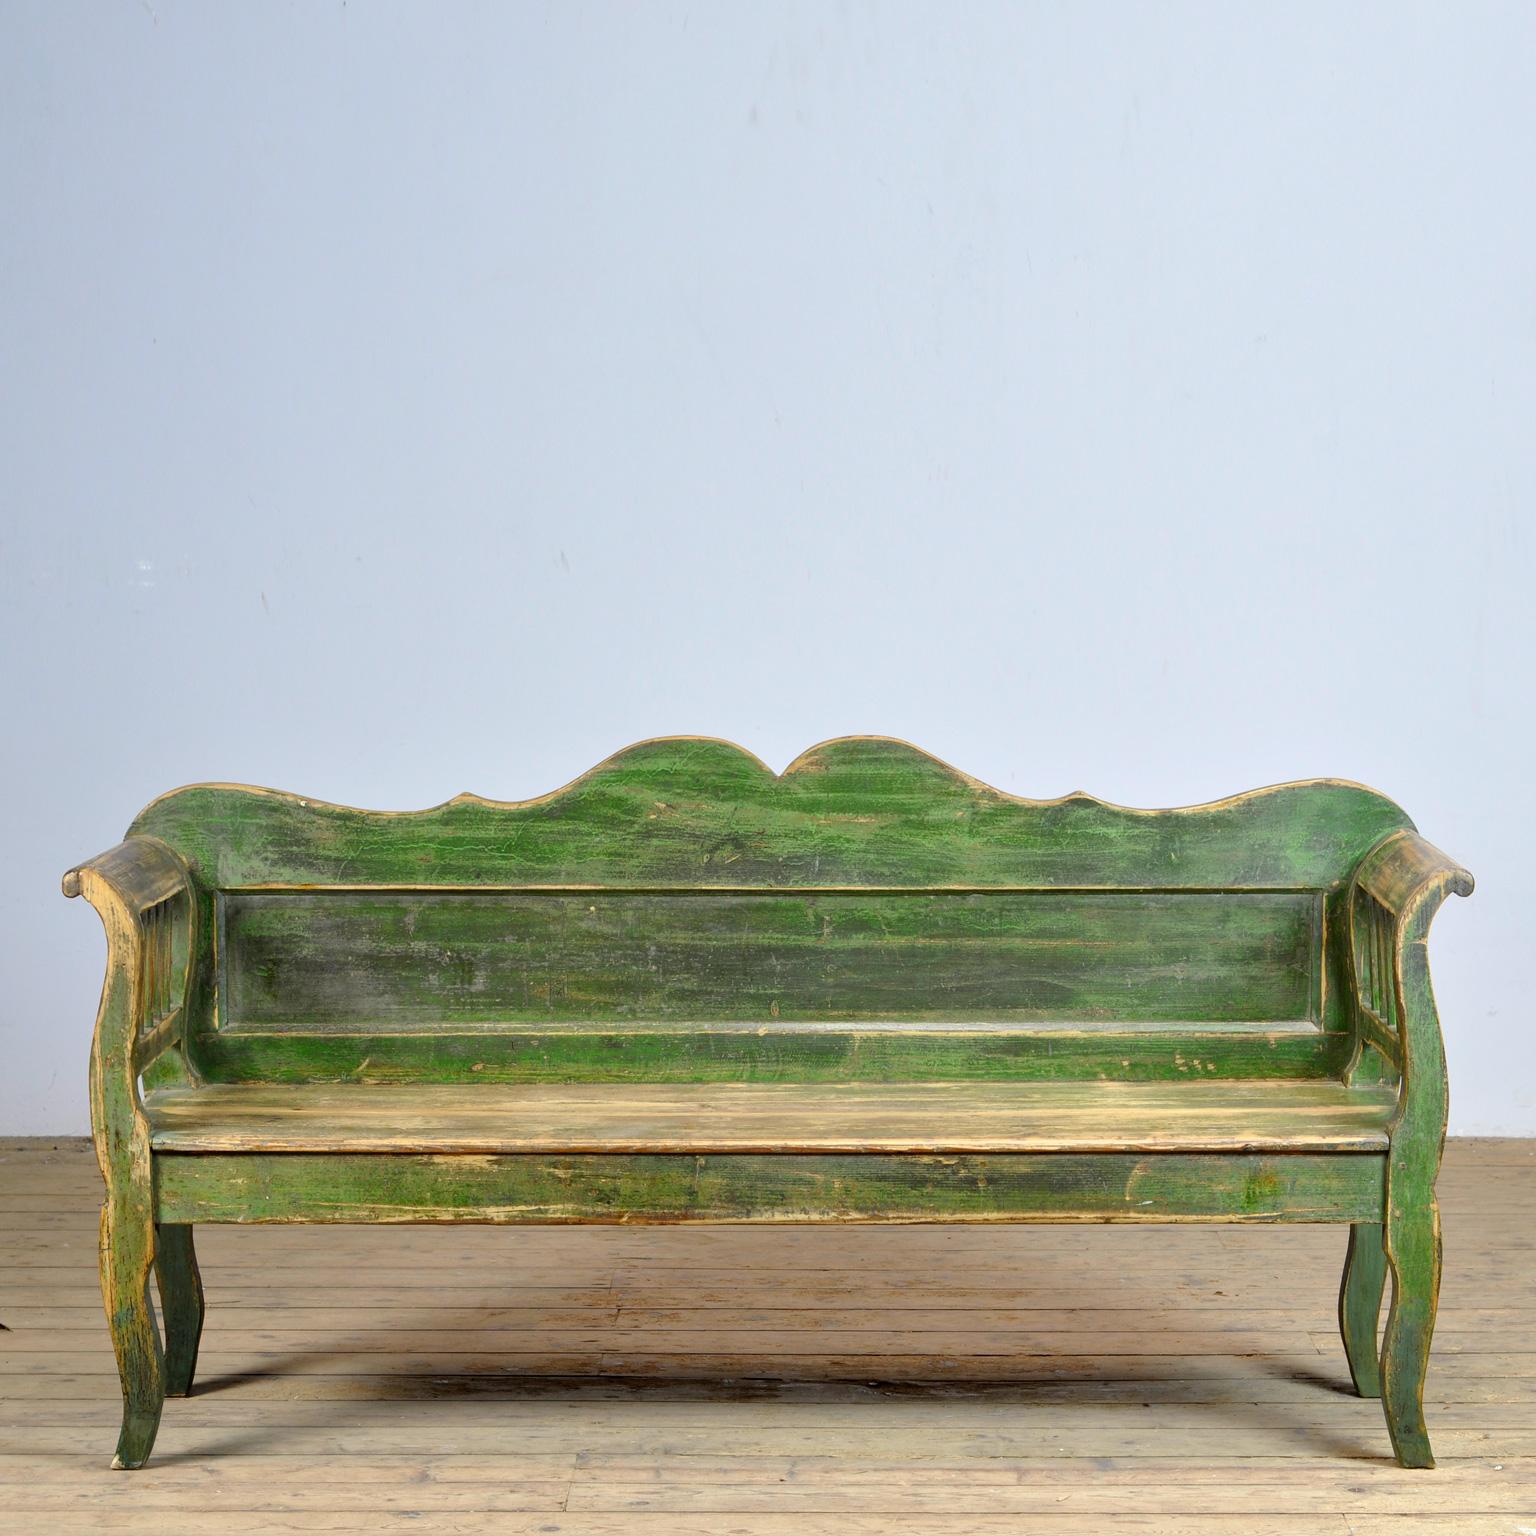 A charming bench from Hungary with the original paint. Over time and use, the green paint has been worn away in places to the wood. The bench is stable and sturdy. Free of woodworm.